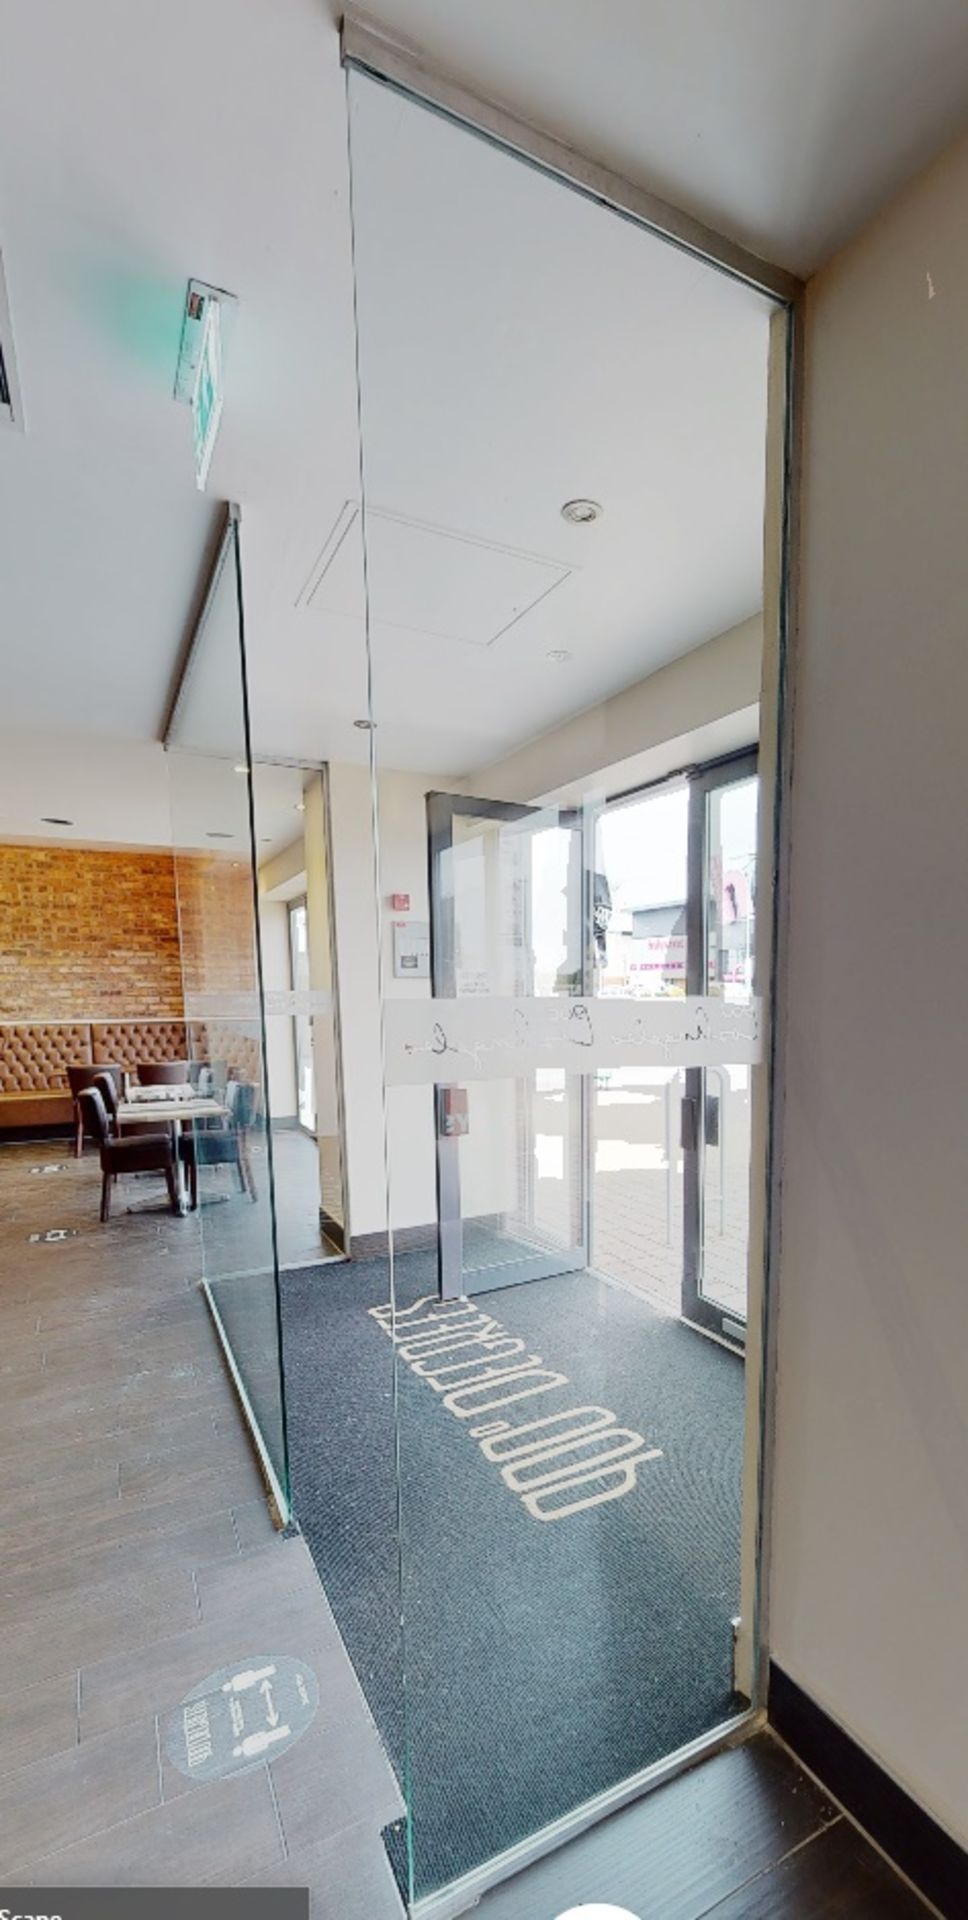 1 x Glass Entrance Foyer - Three Sections of Glass - Please See Details - CL701 - Location: Ashton - Image 6 of 7